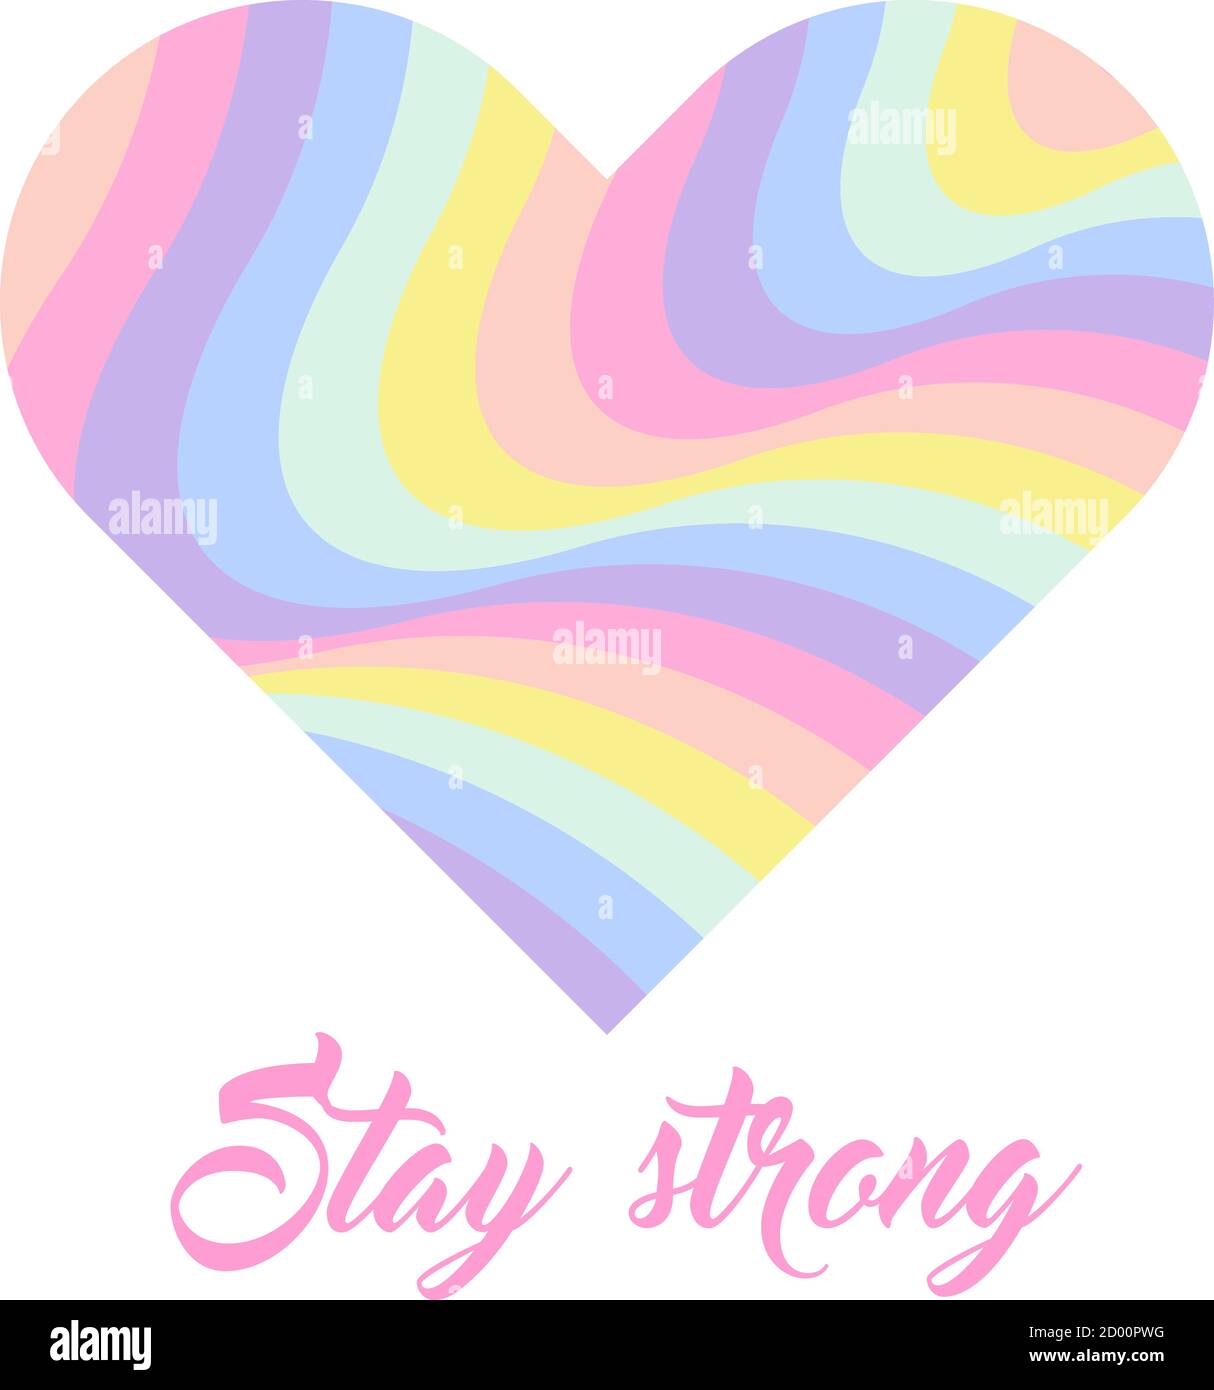 Pastel rainbow heart background, inspirational quote lettering - Stay strong. LGBTQ colors. Abstract geometric striped pattern, rainbow stripes. Vecto Stock Vector